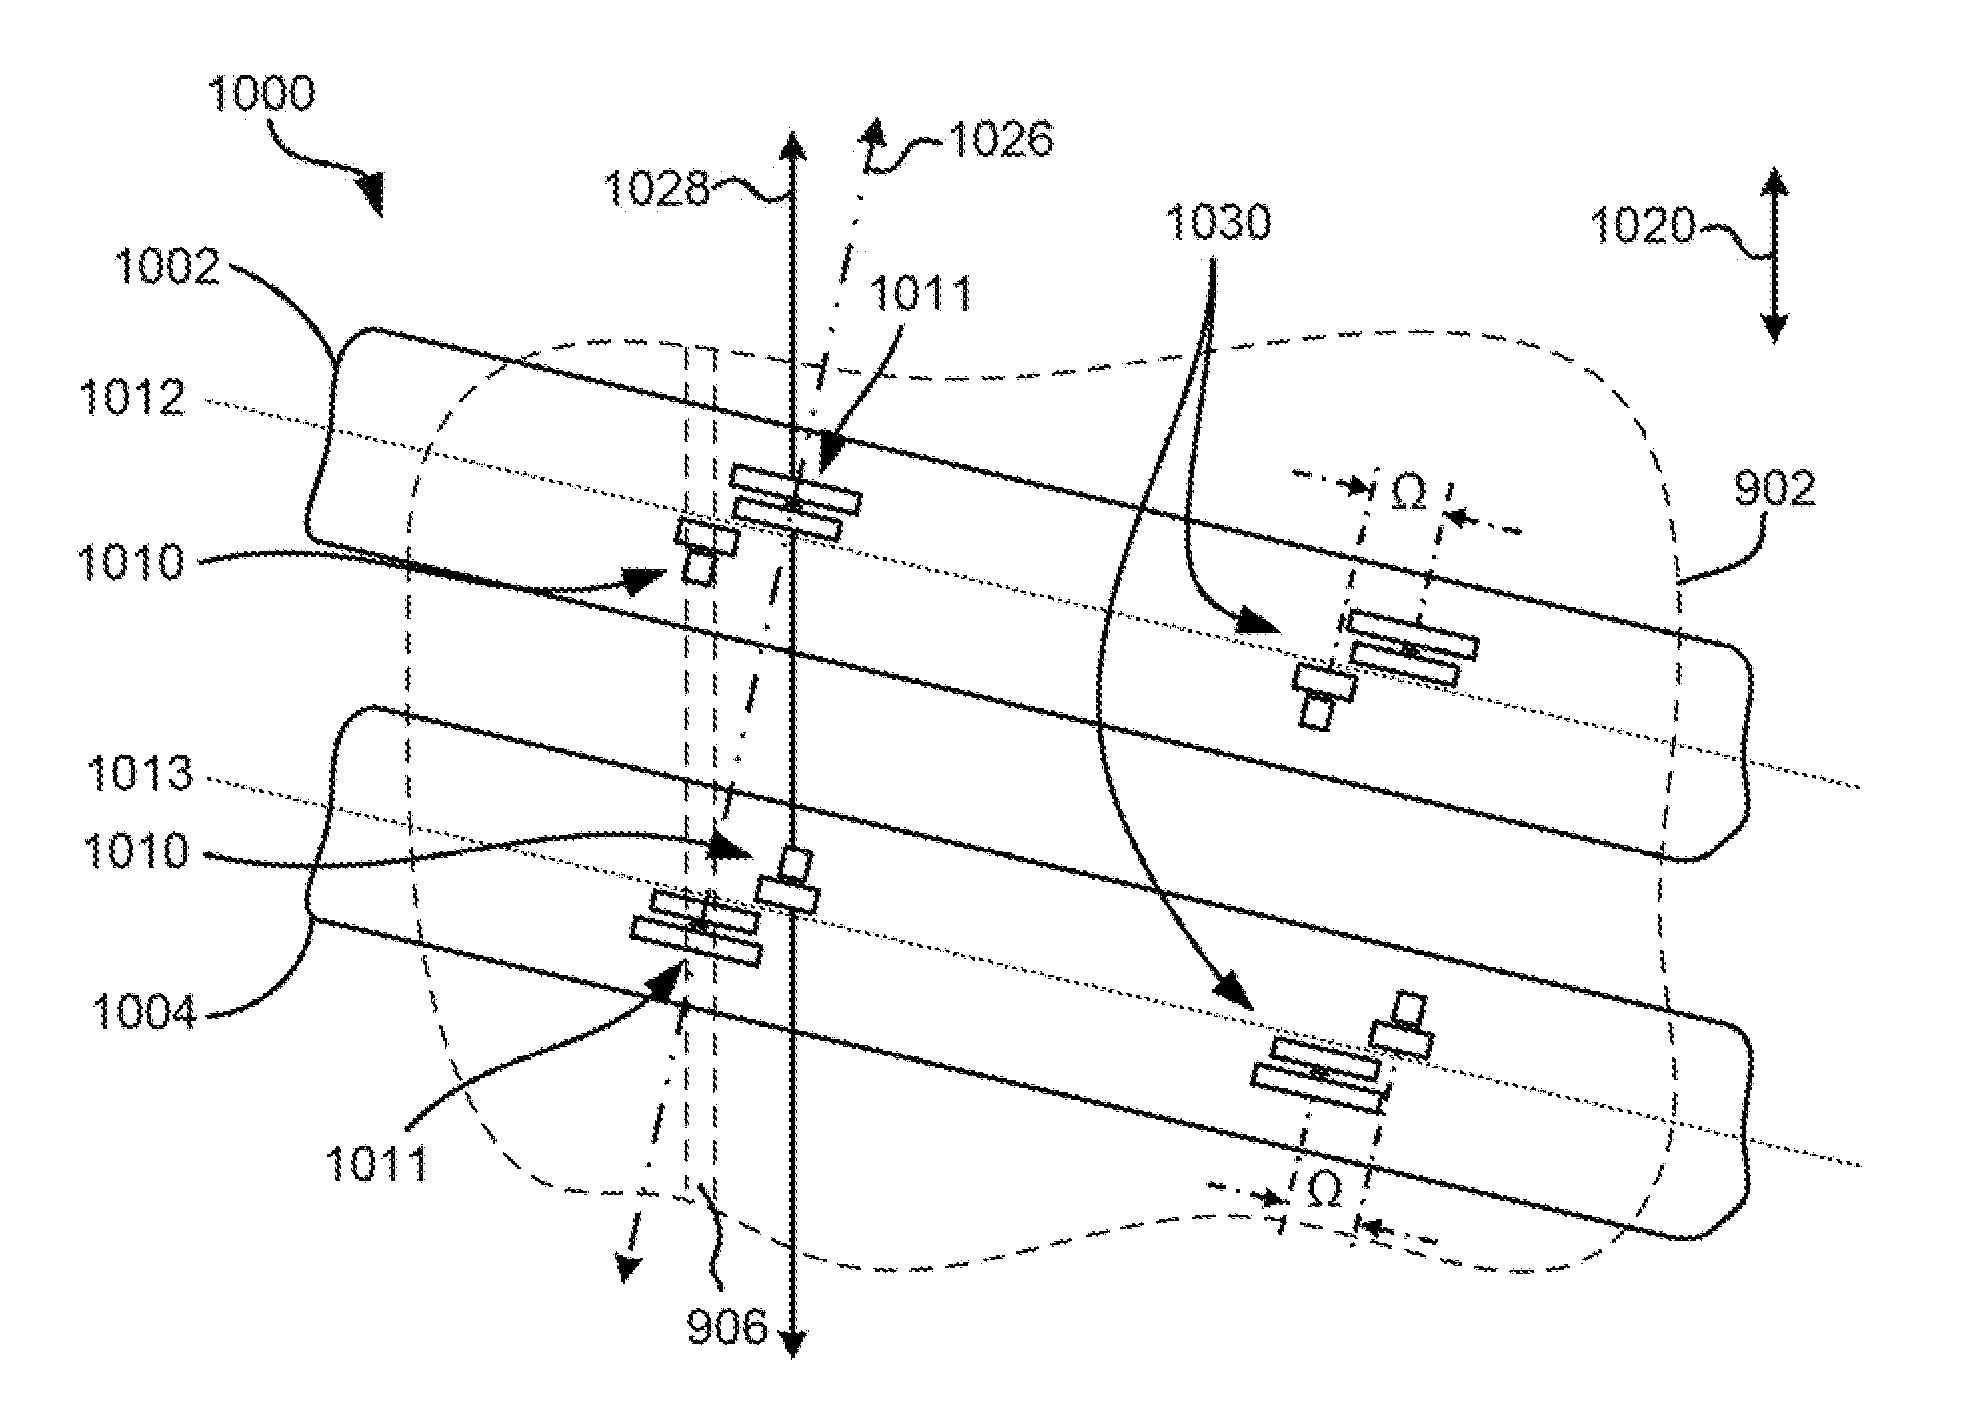 Quasi-statically tilted head having offset reader/writer transducer pairs